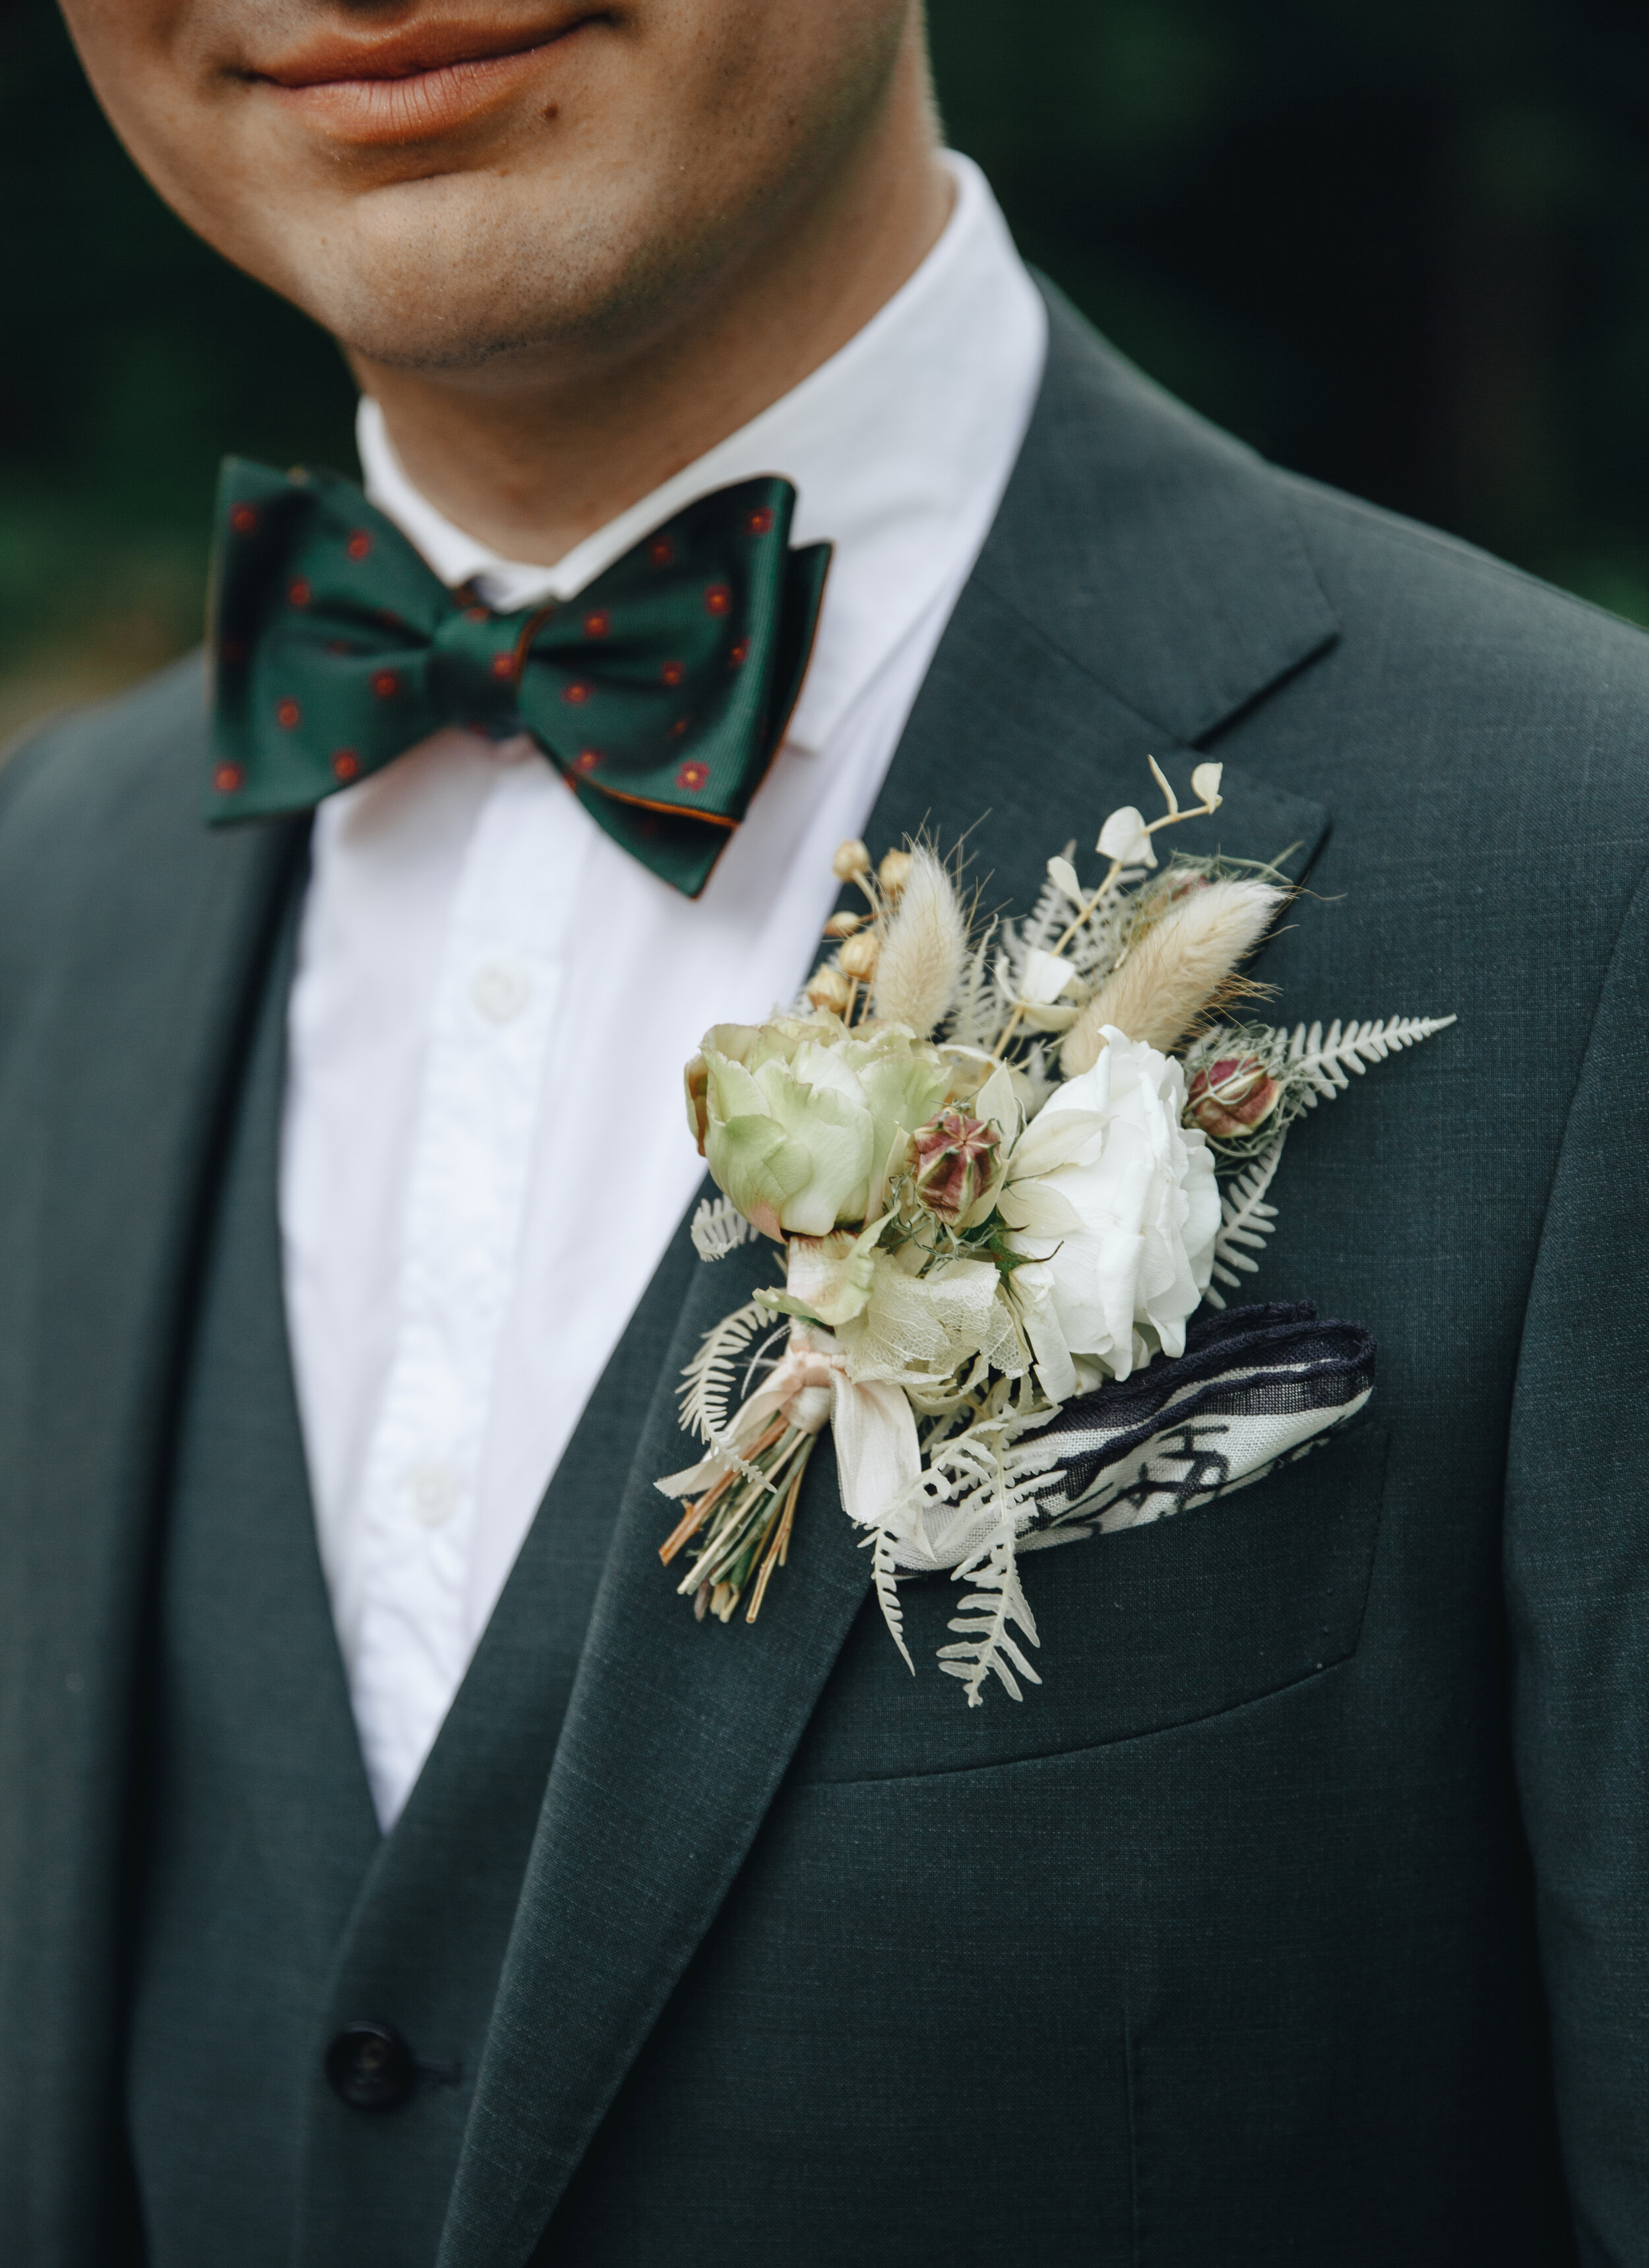 Bohemian, modern groom’s boutonniere with dried ferns and textures. Nashville wedding flowers.